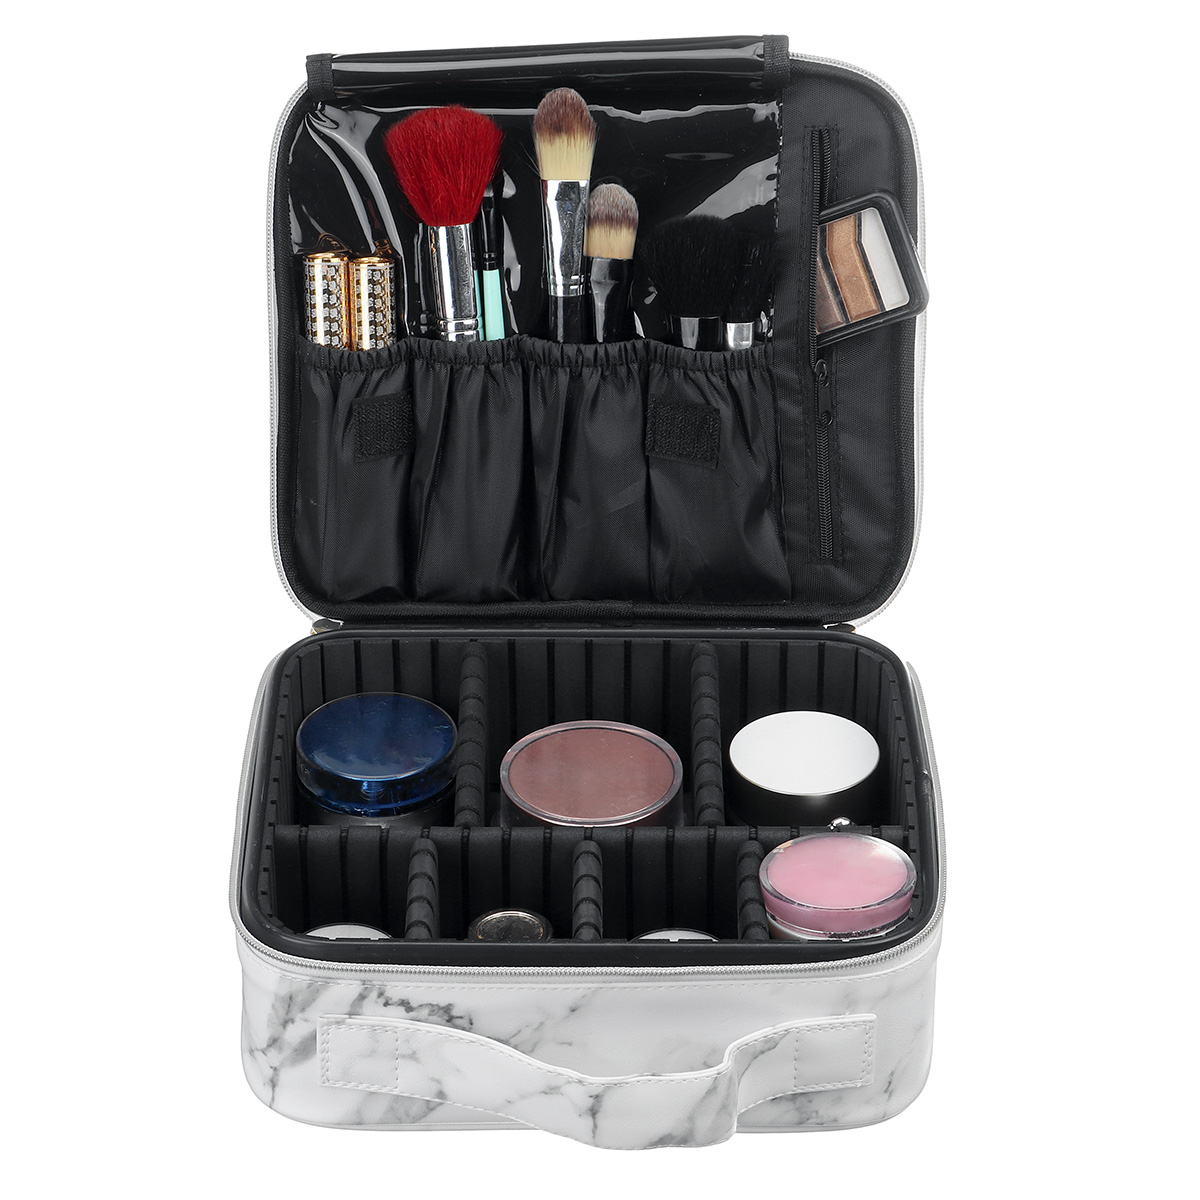 Portable-Large-Capacity-Multi-Grid-Cosmetic-Make-Up-Nail-Toiletry-Travel-Carry-Bag-Storage-Bag-Beaut-1859825-10